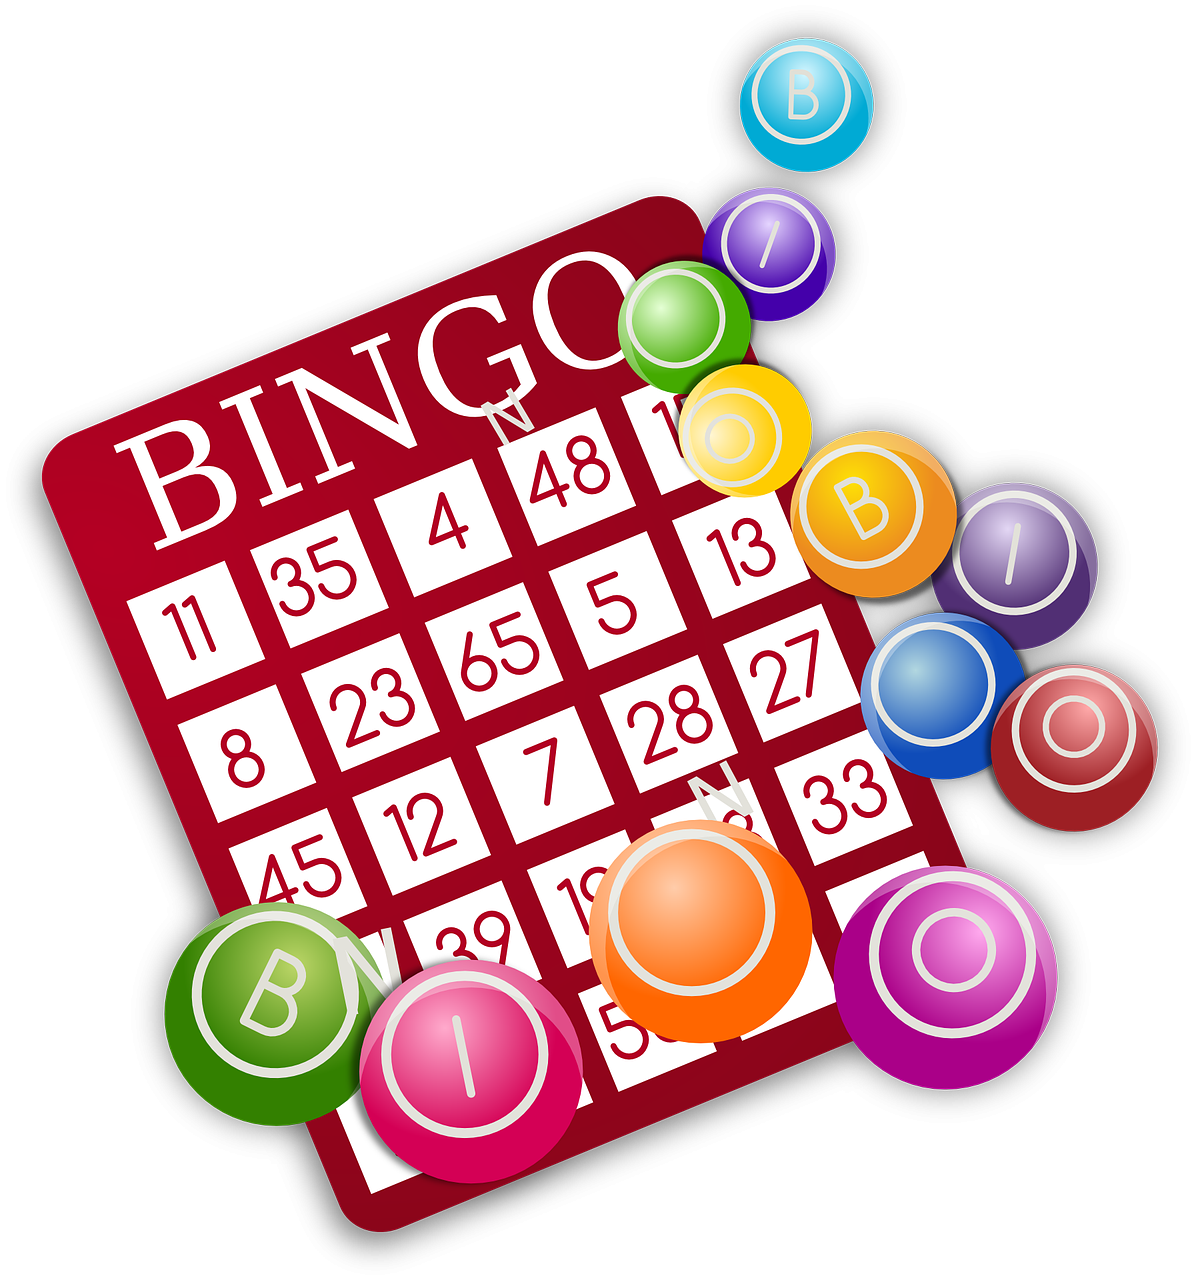 Illustration of bingo card markers scattered across card 